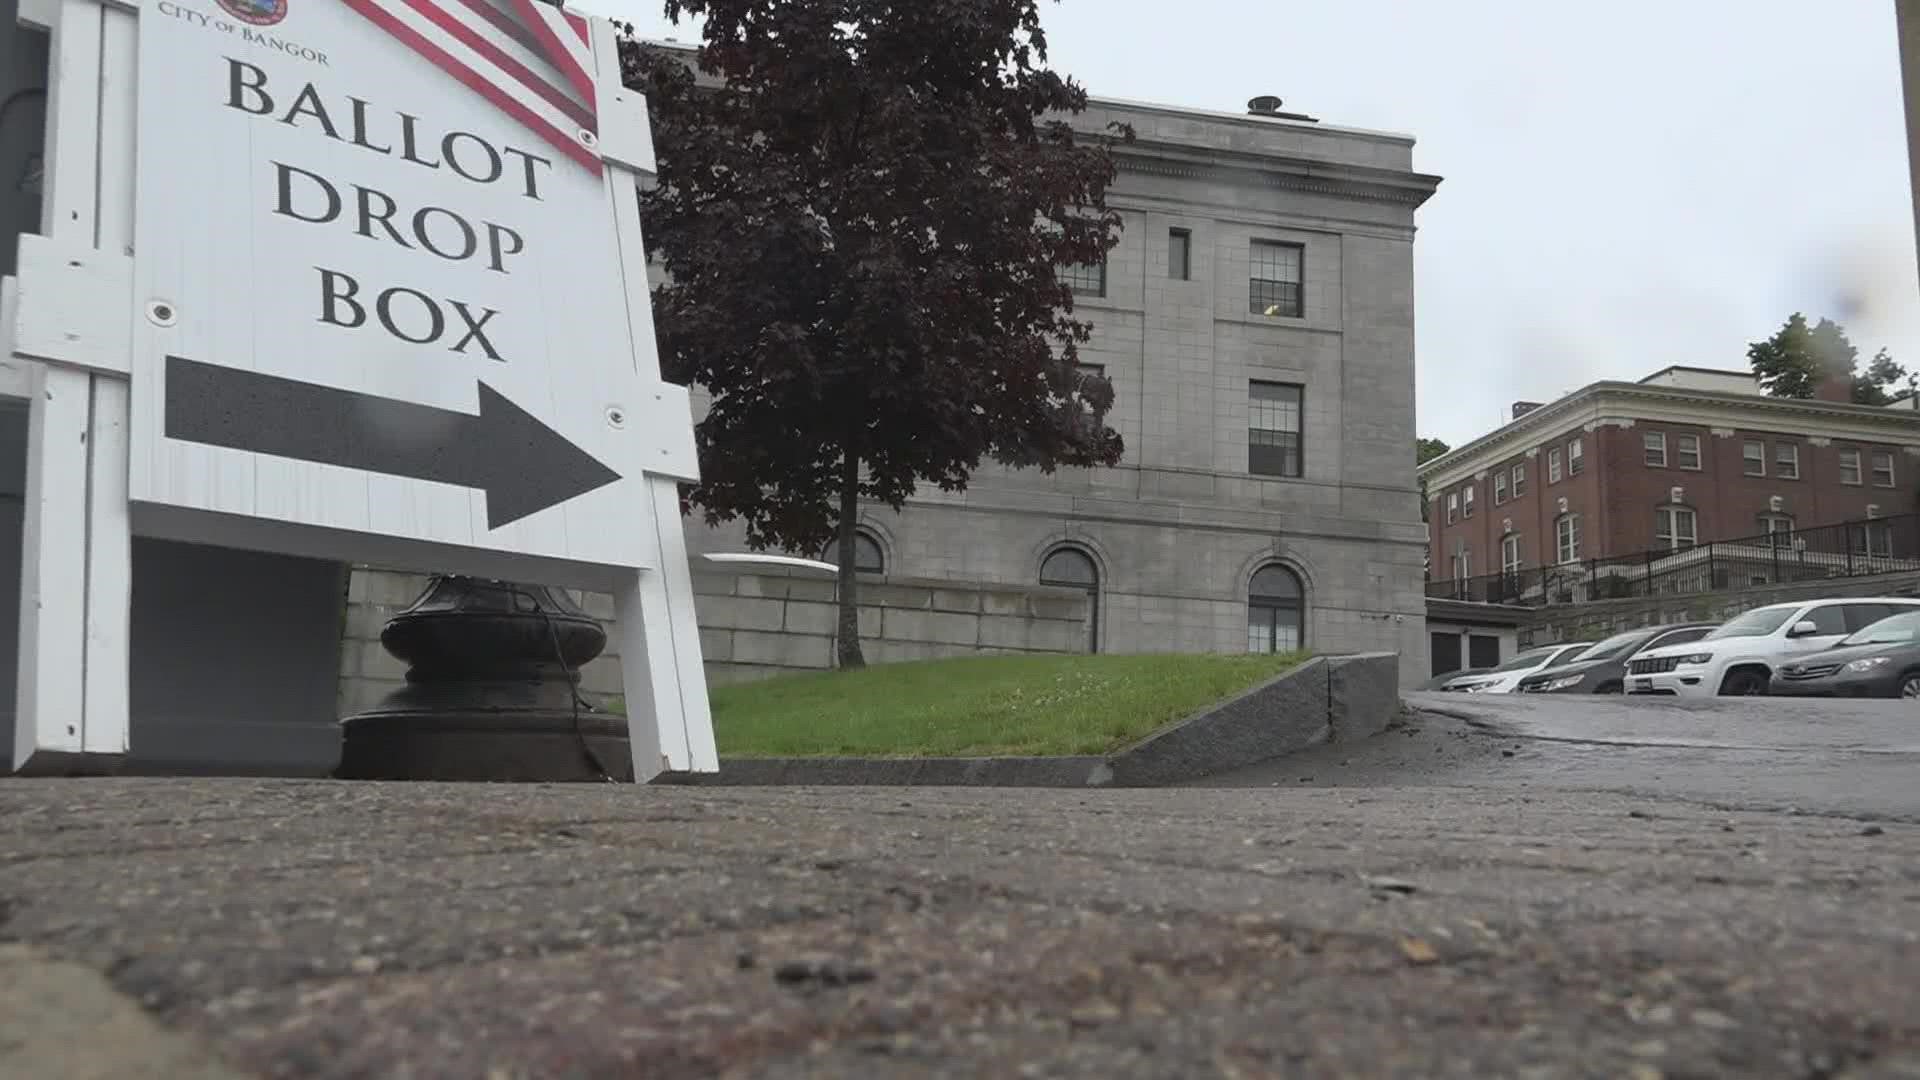 Voters in Bangor can cast their ballot at the Cross Insurance Center in Bangor from 7 a.m. to 8 p.m. on Tuesday.